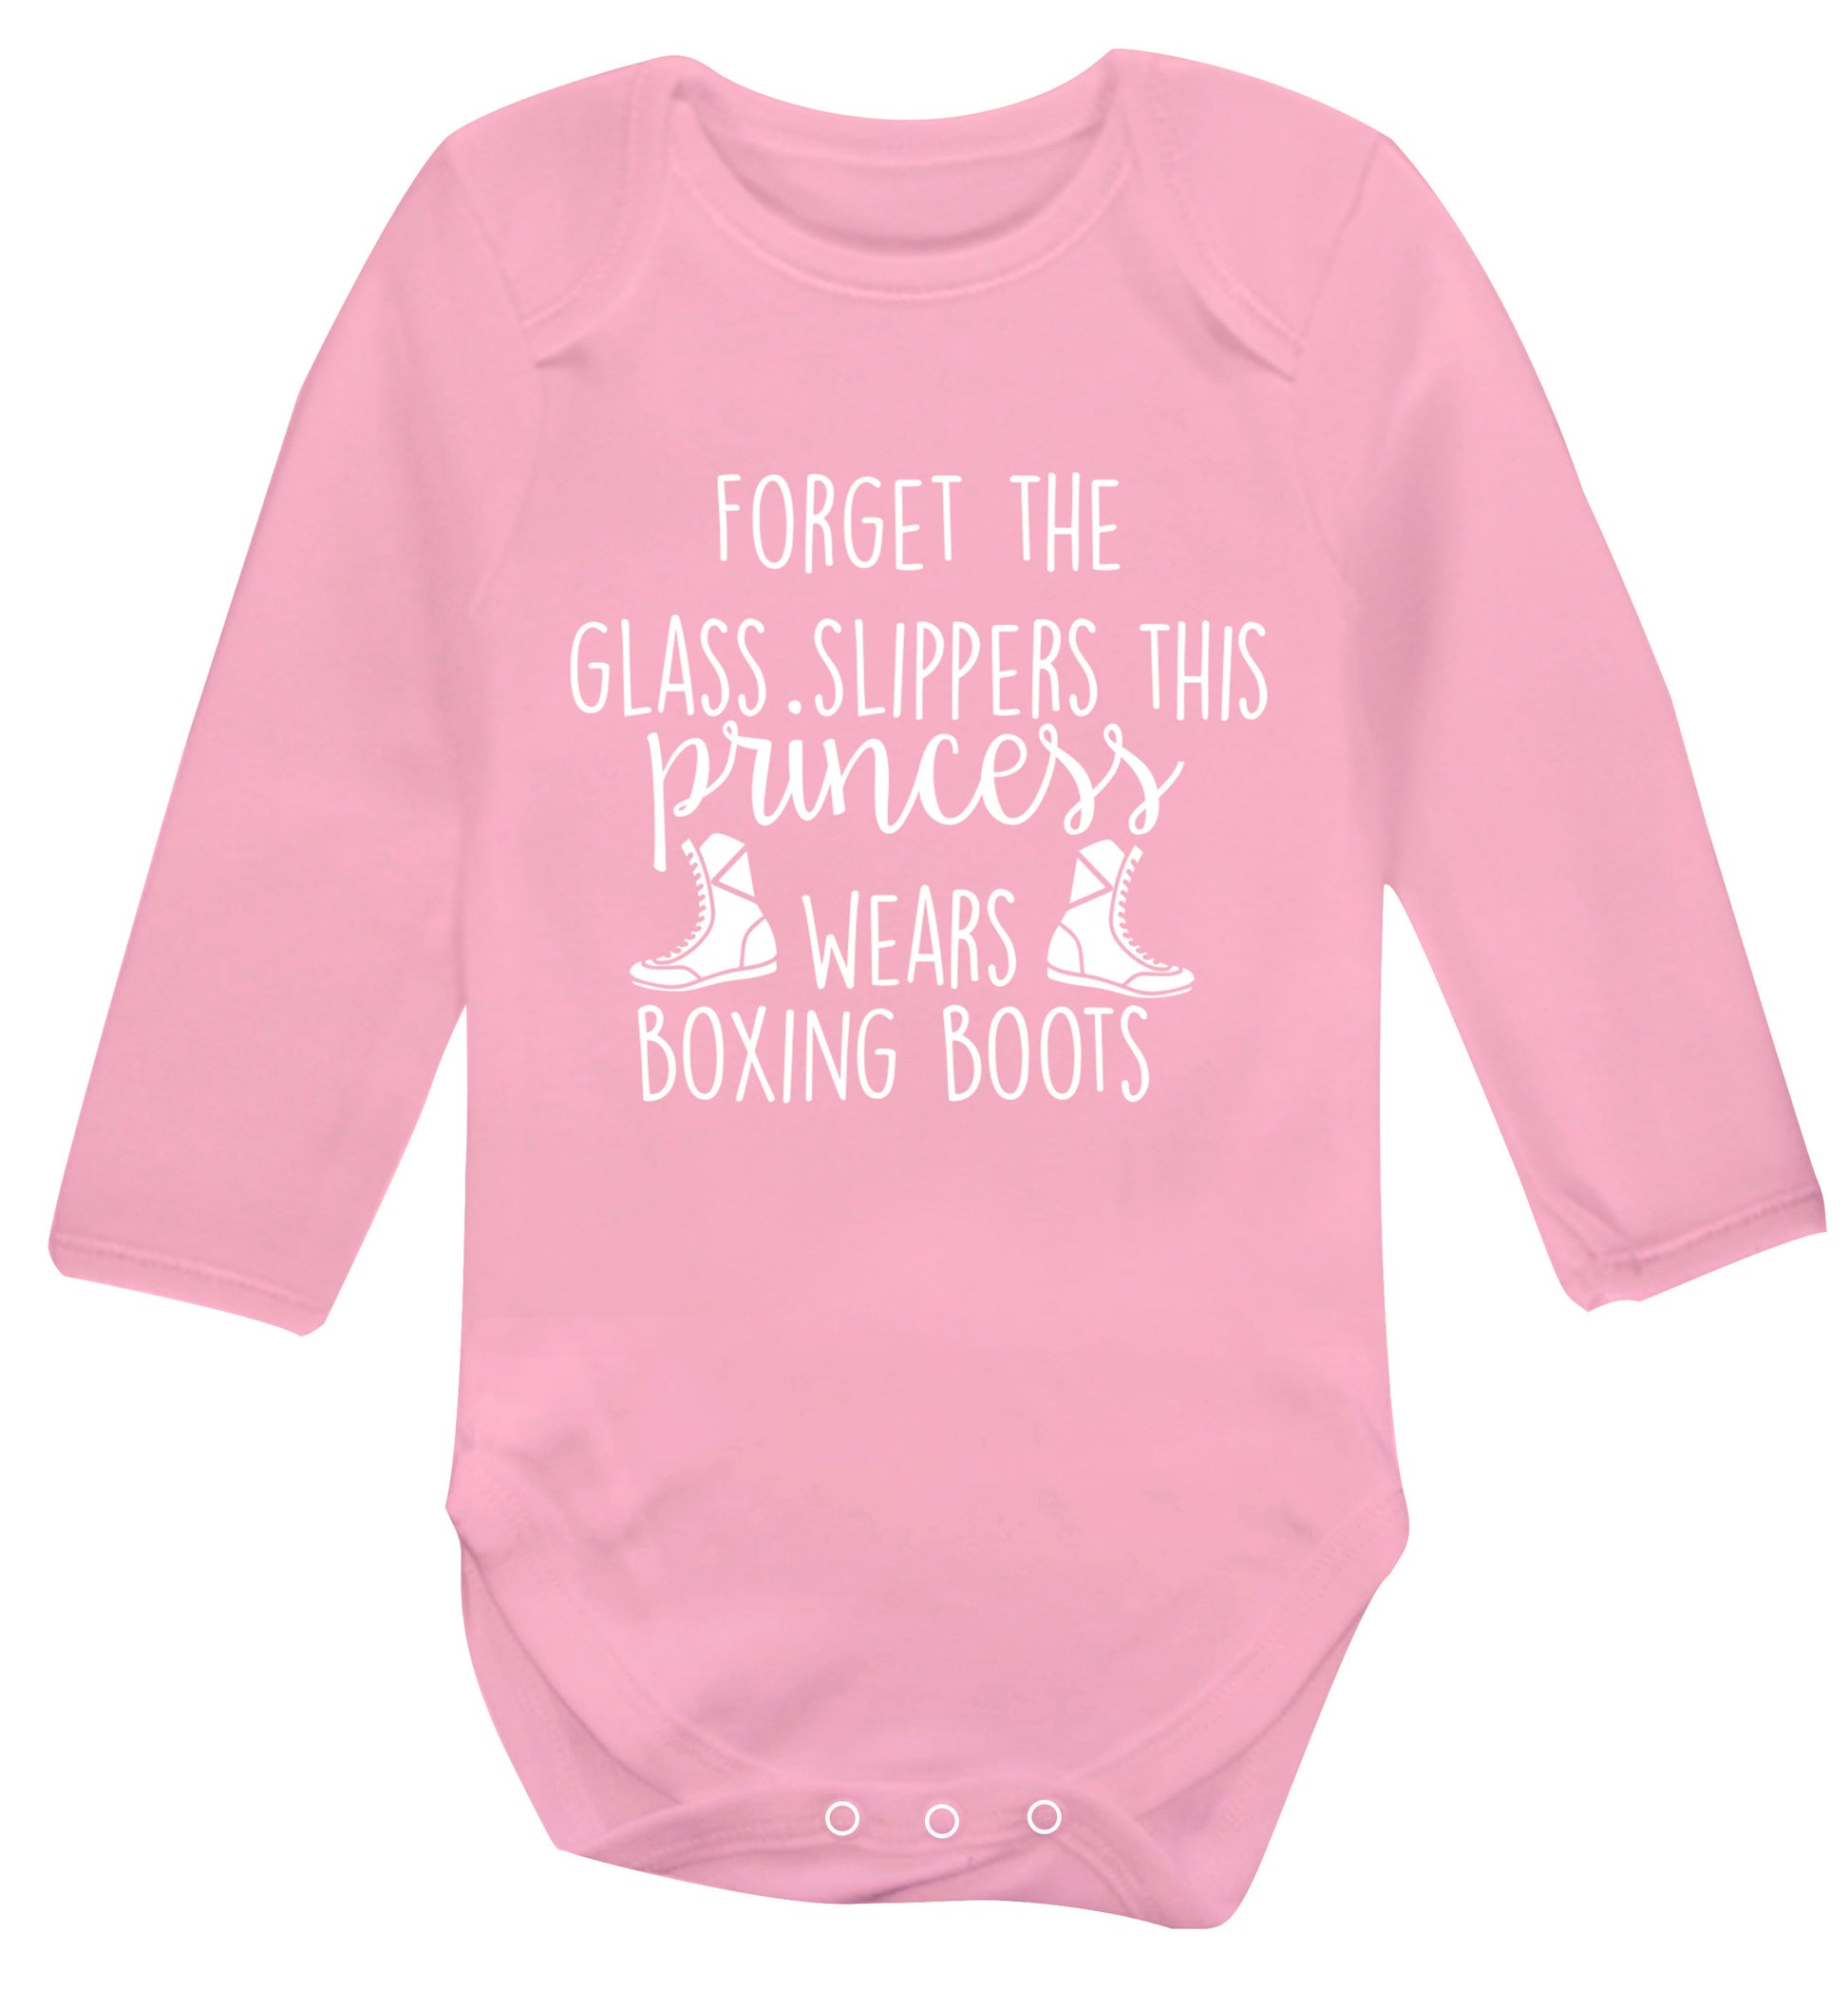 Forget the glass slippers this princess wears boxing boots Baby Vest long sleeved pale pink 6-12 months